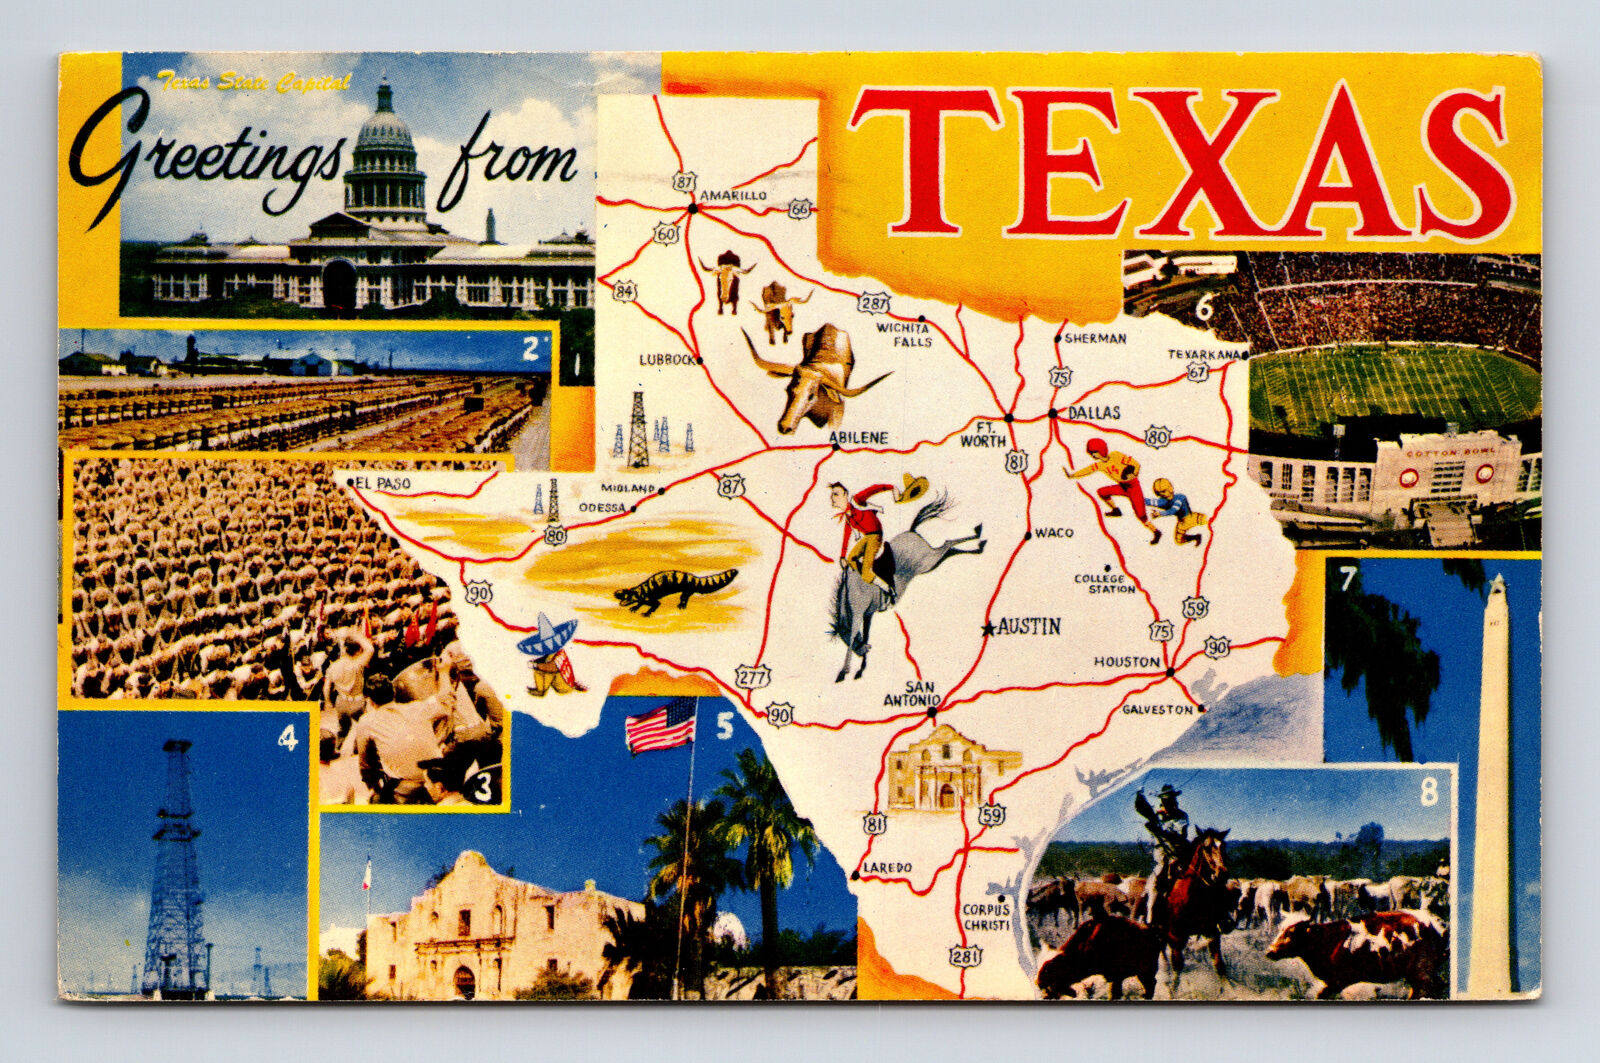 c1964 Pictorial Map & Multi-View Greetings from Uvalde Texas TX Postcard